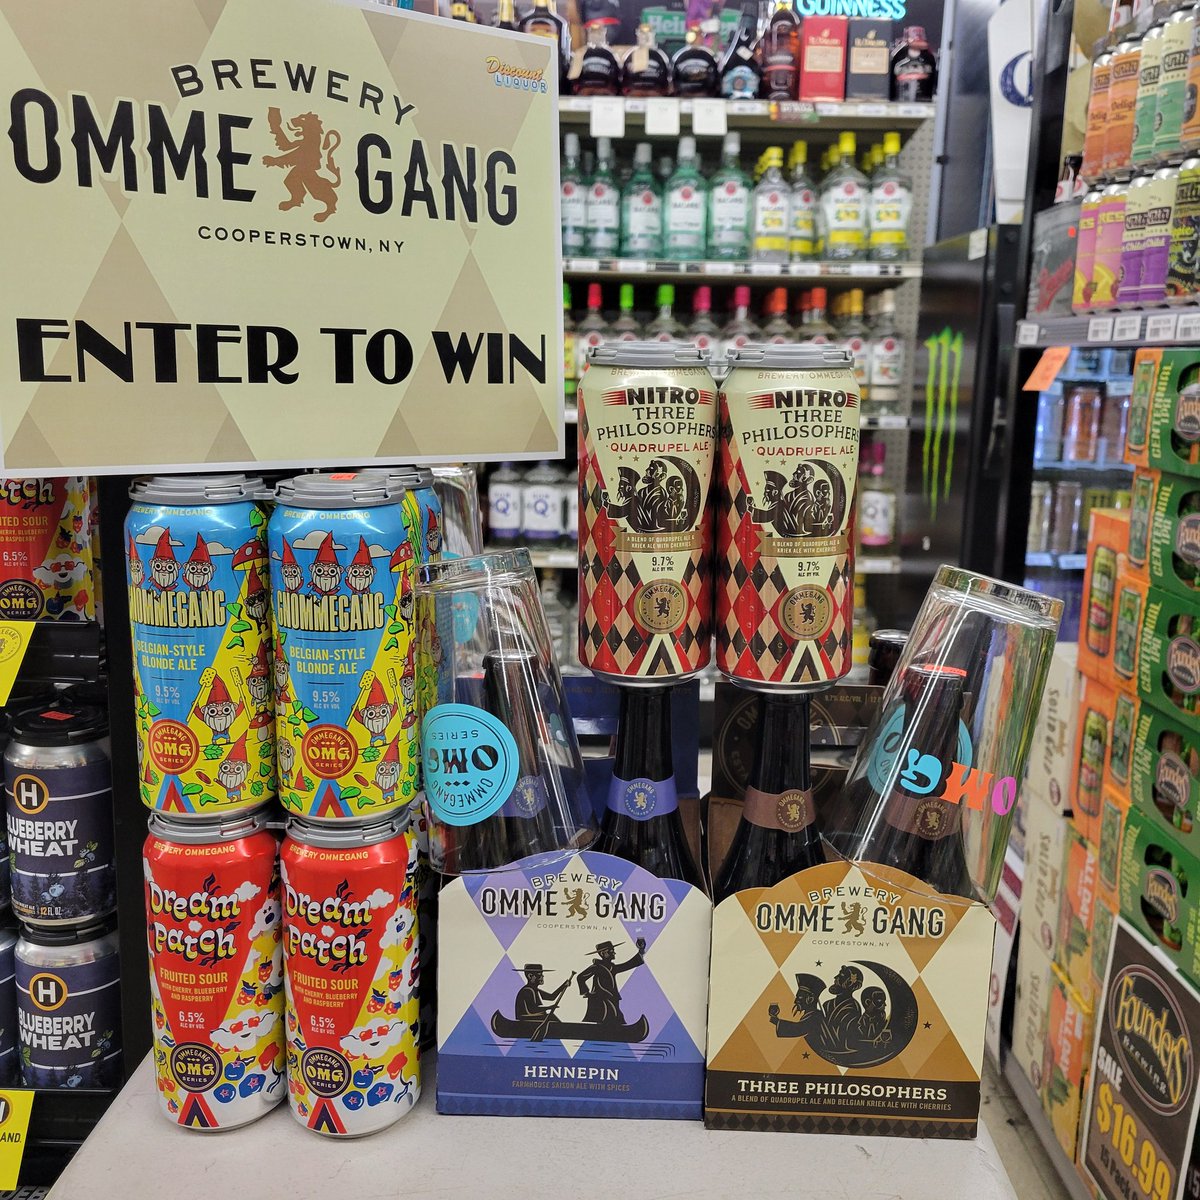 Enjoy a sample this afternoon with @BreweryOmmegang from 12-2!